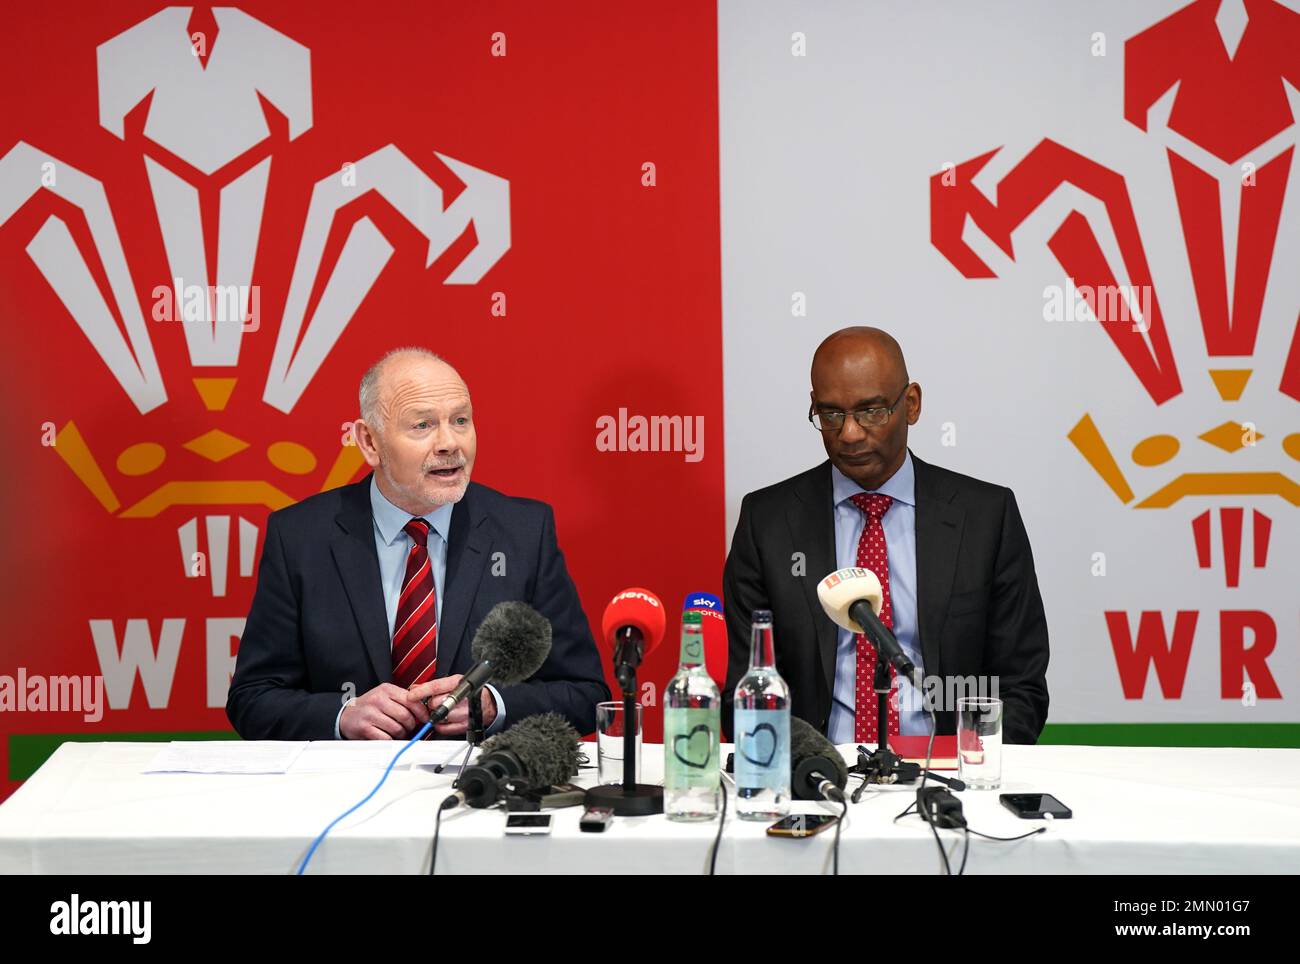 Welsh Rugby Union chairman Ieuan Evans (left) and acting chief executive Nigel Walker during a press conference at the Principality Stadium, Cardiff. Ieuan Evans has vowed to remain as Welsh Rugby Union chair despite allegations of a 'toxic culture' at the organisation that resulted in chief executive Steve Phillips' resignation on Sunday. Phillips' resignation came after a turbulent week in Welsh rugby following a documentary airing allegations of misogyny, sexism, racism and homophobia at the game's governing body in Wales. Picture date: Monday January 30, 2023. Stock Photo